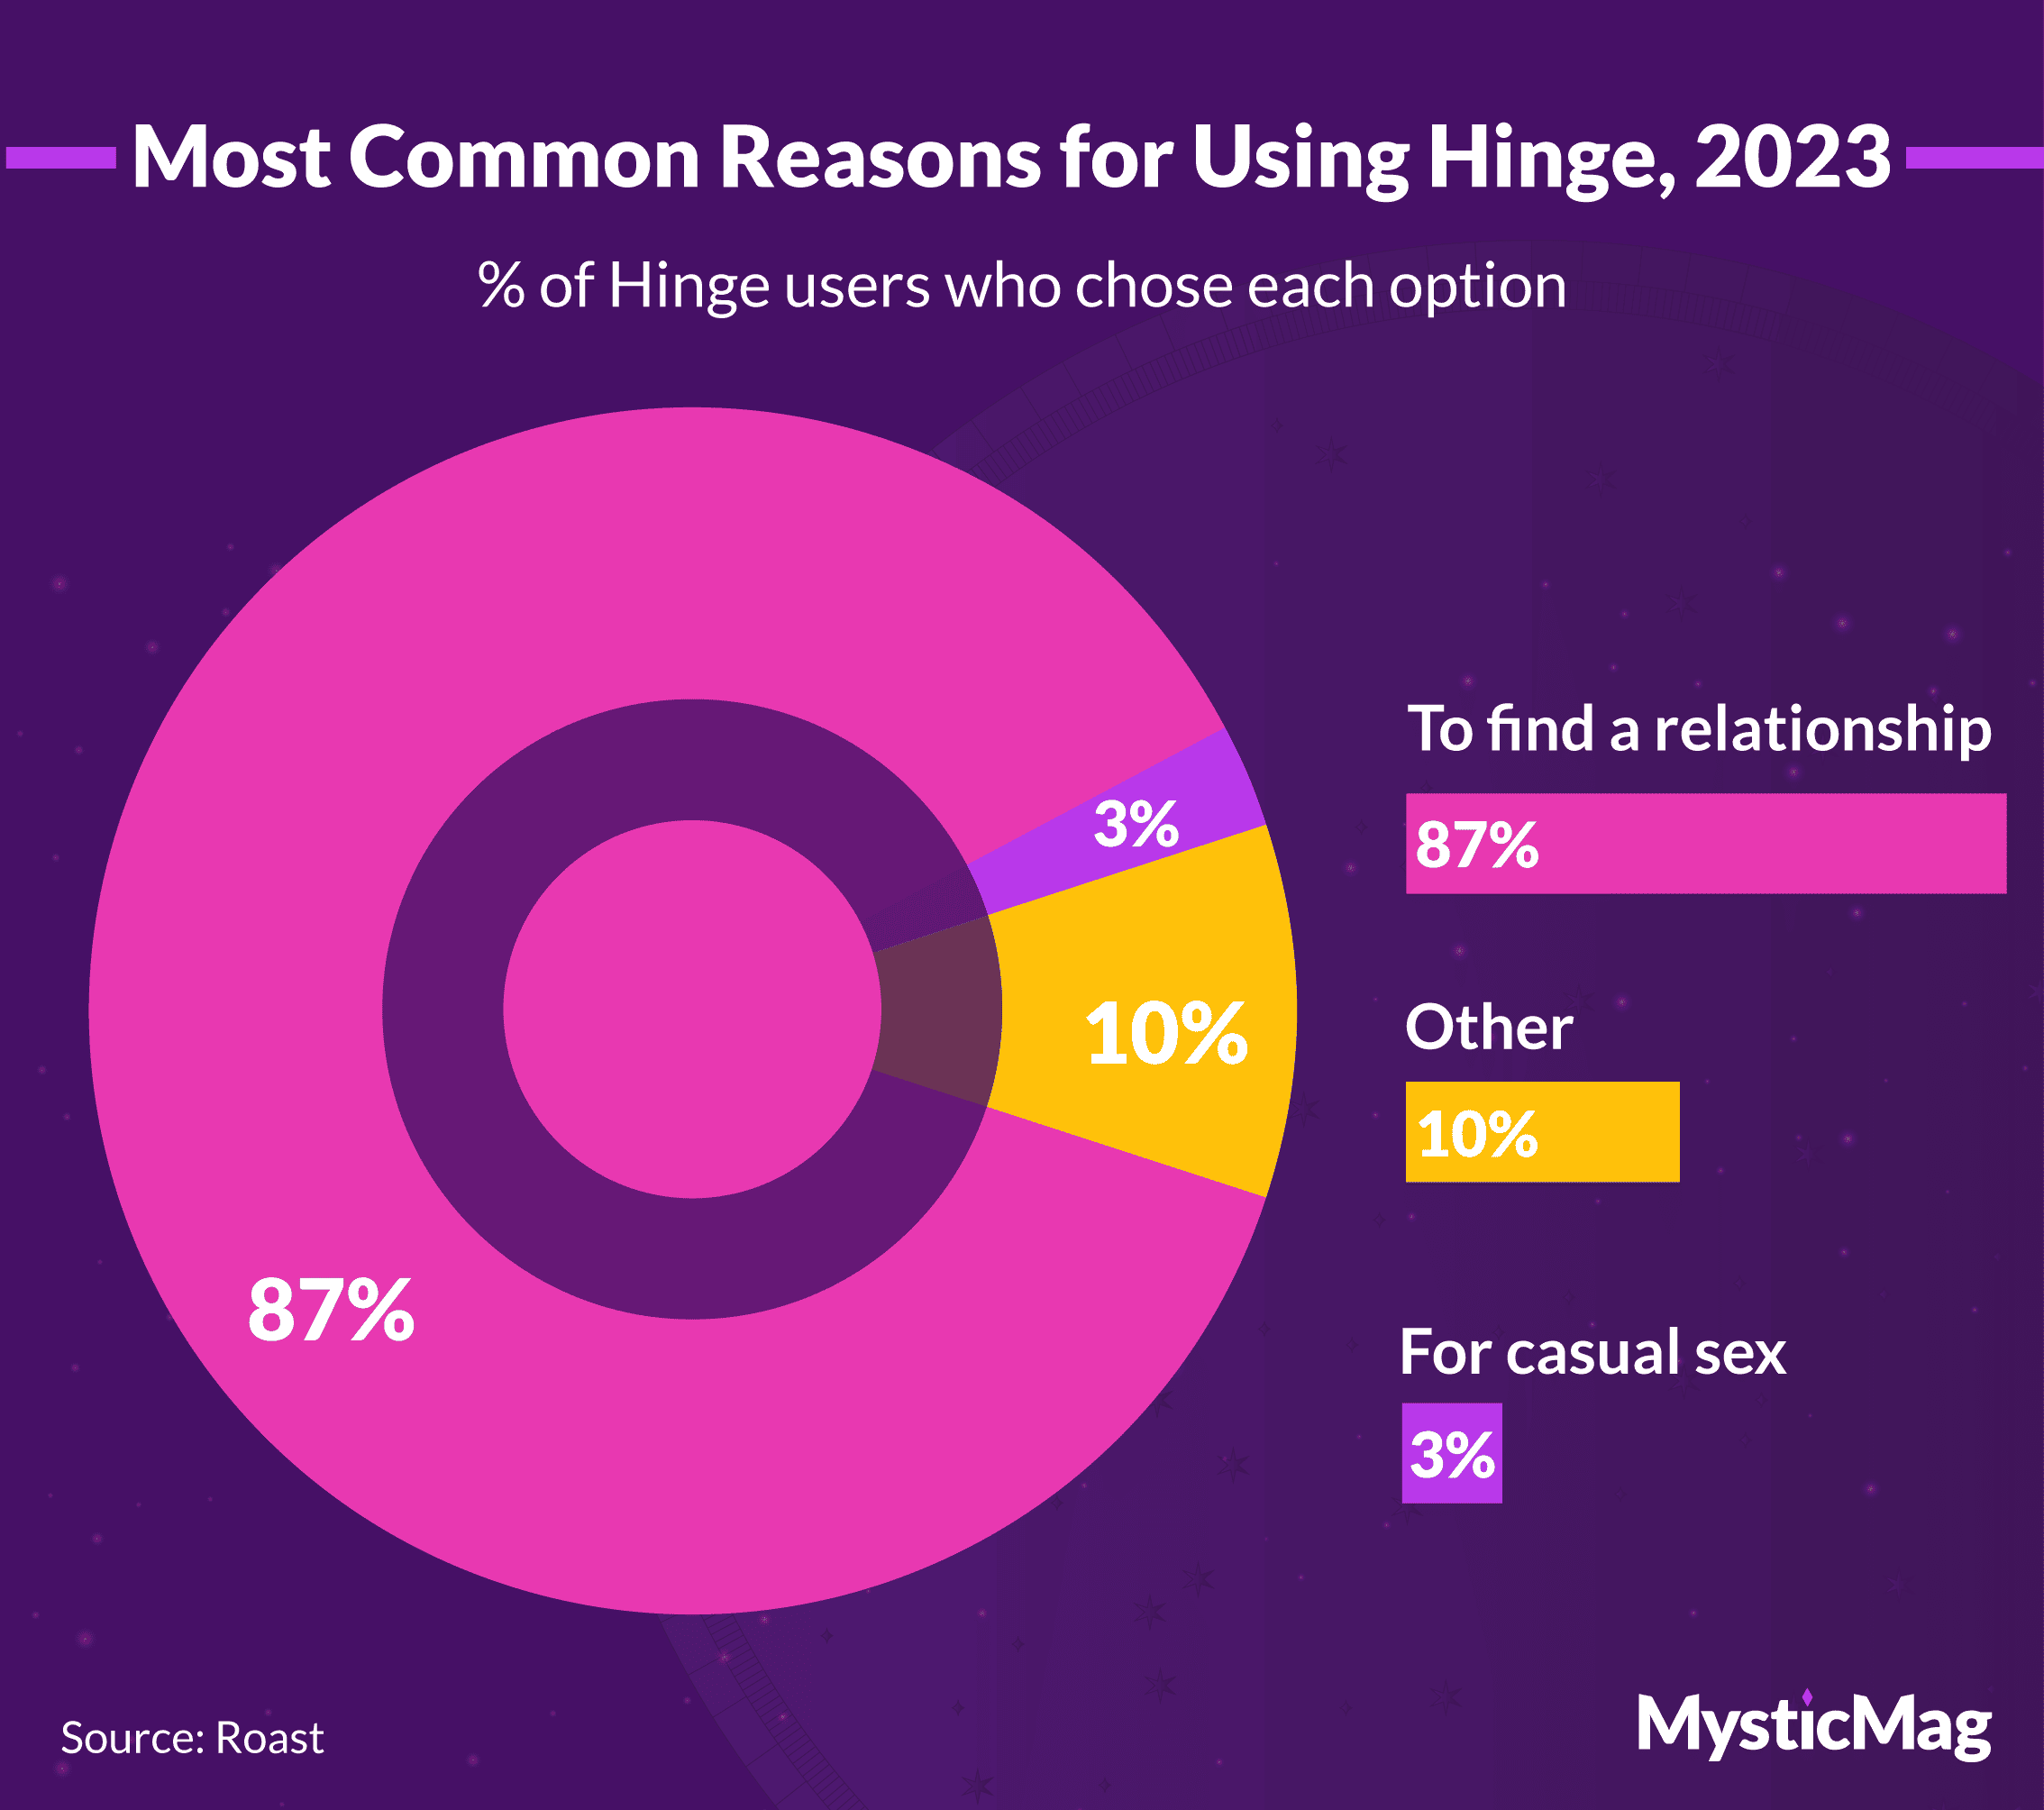 Most common reasons for using Hinge, 2023